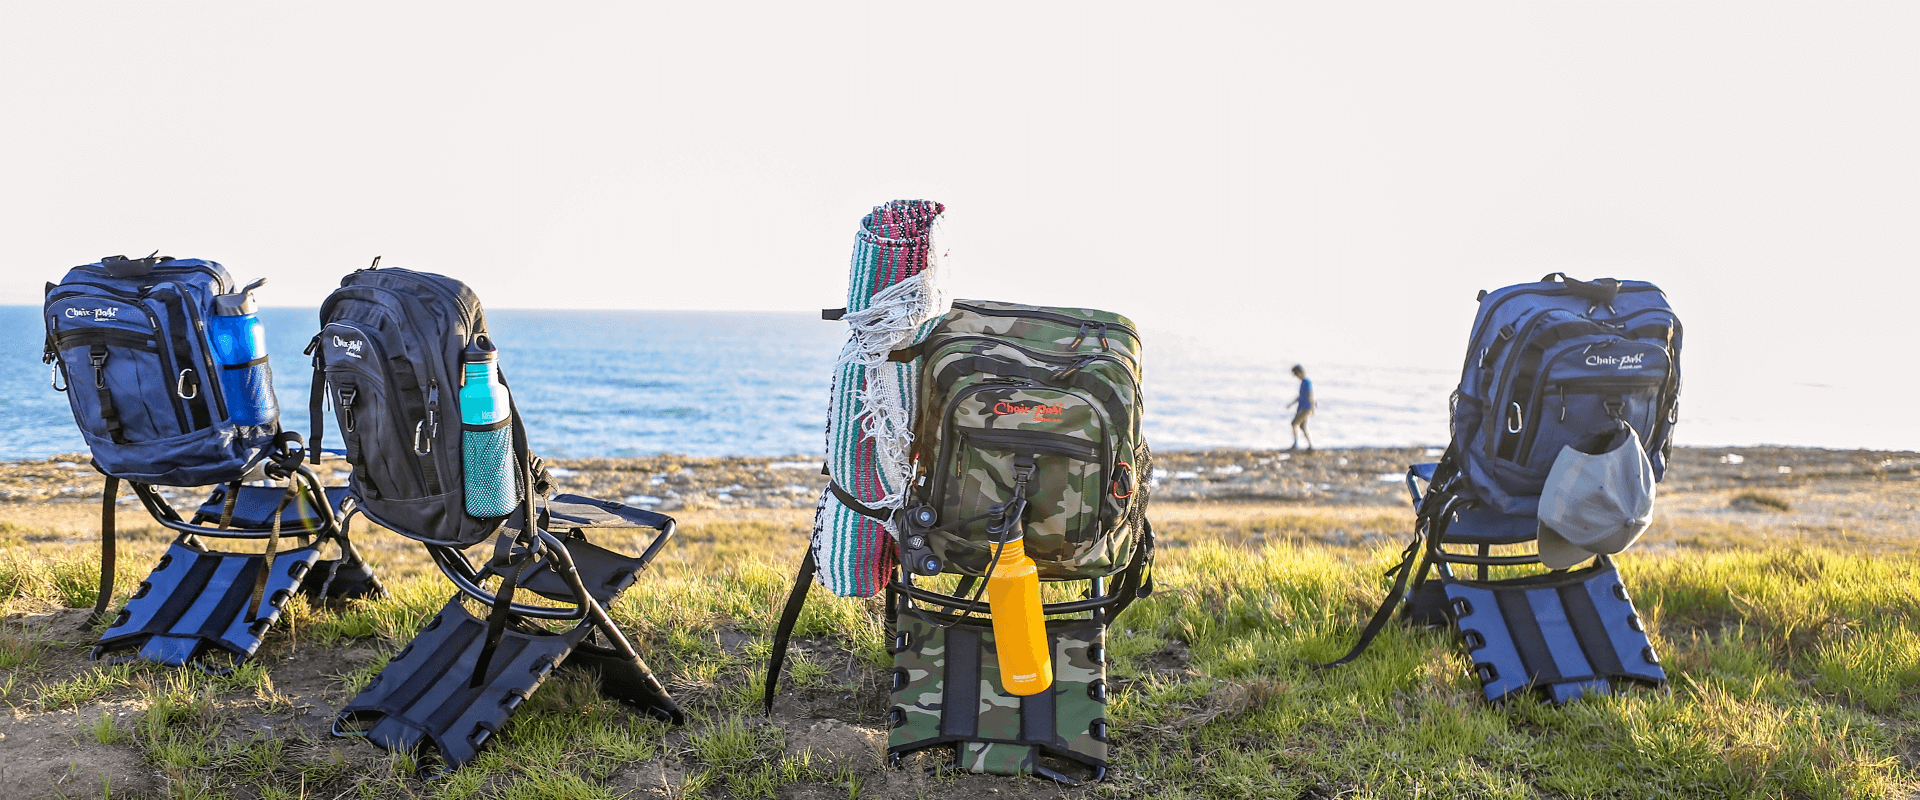 Micro Trader Backpack Chair Stool Fishing Camping Hiking : Buy Online at  Best Price in KSA - Souq is now Amazon.sa: Sporting Goods